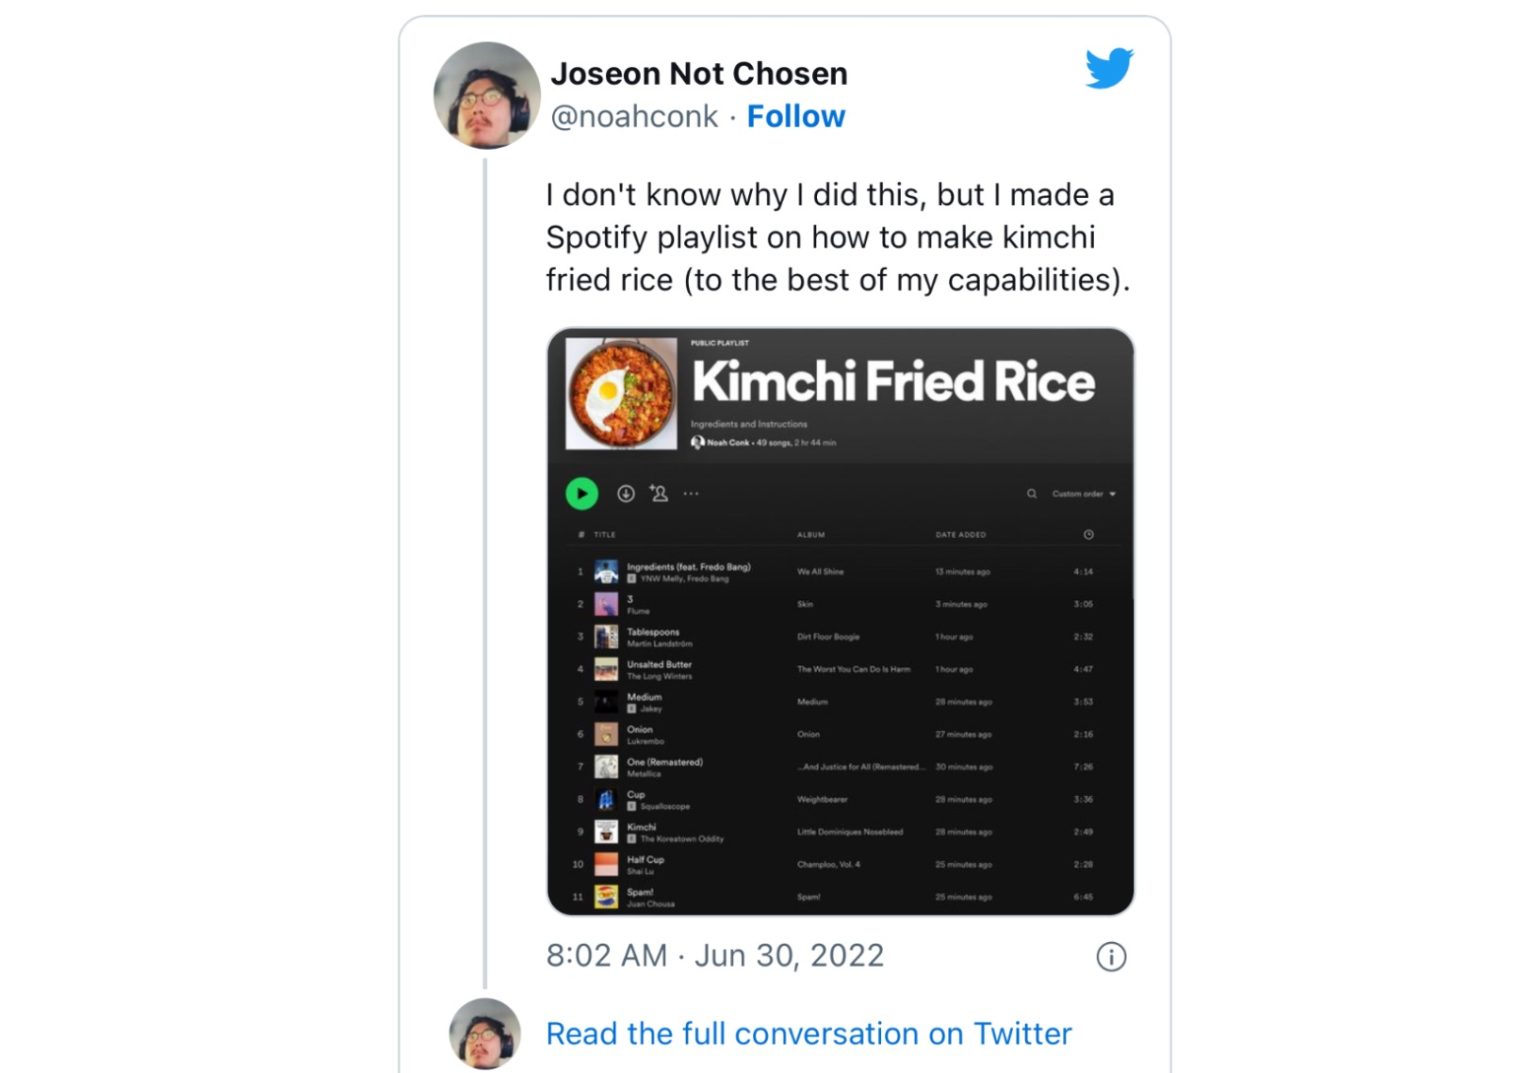 This is a ‚Kimchi Fried Rice‘ Recipe as a Spotify Playlist